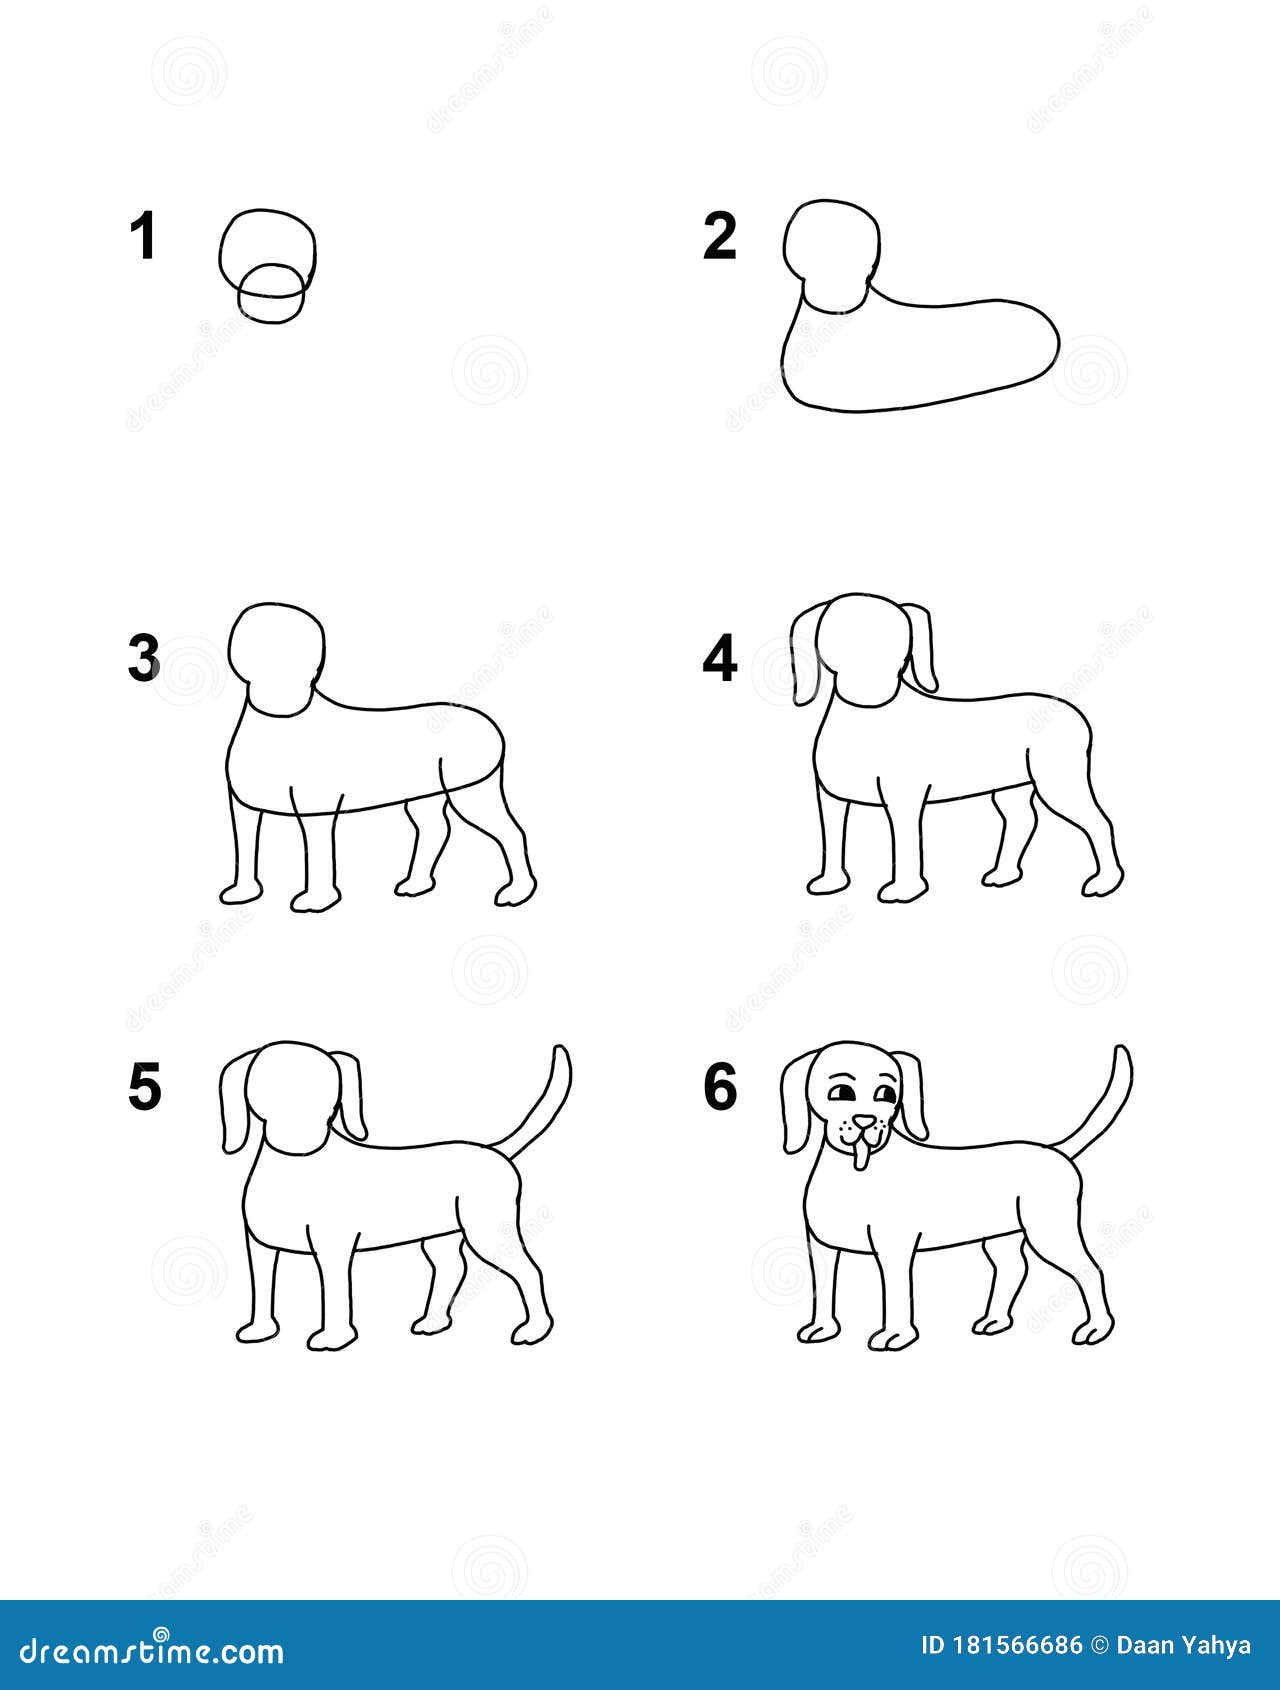 How To Draw Dog Step by Step Cartoon Illustration with White Background  Stock Illustration - Illustration of lineart, elephant: 181566686